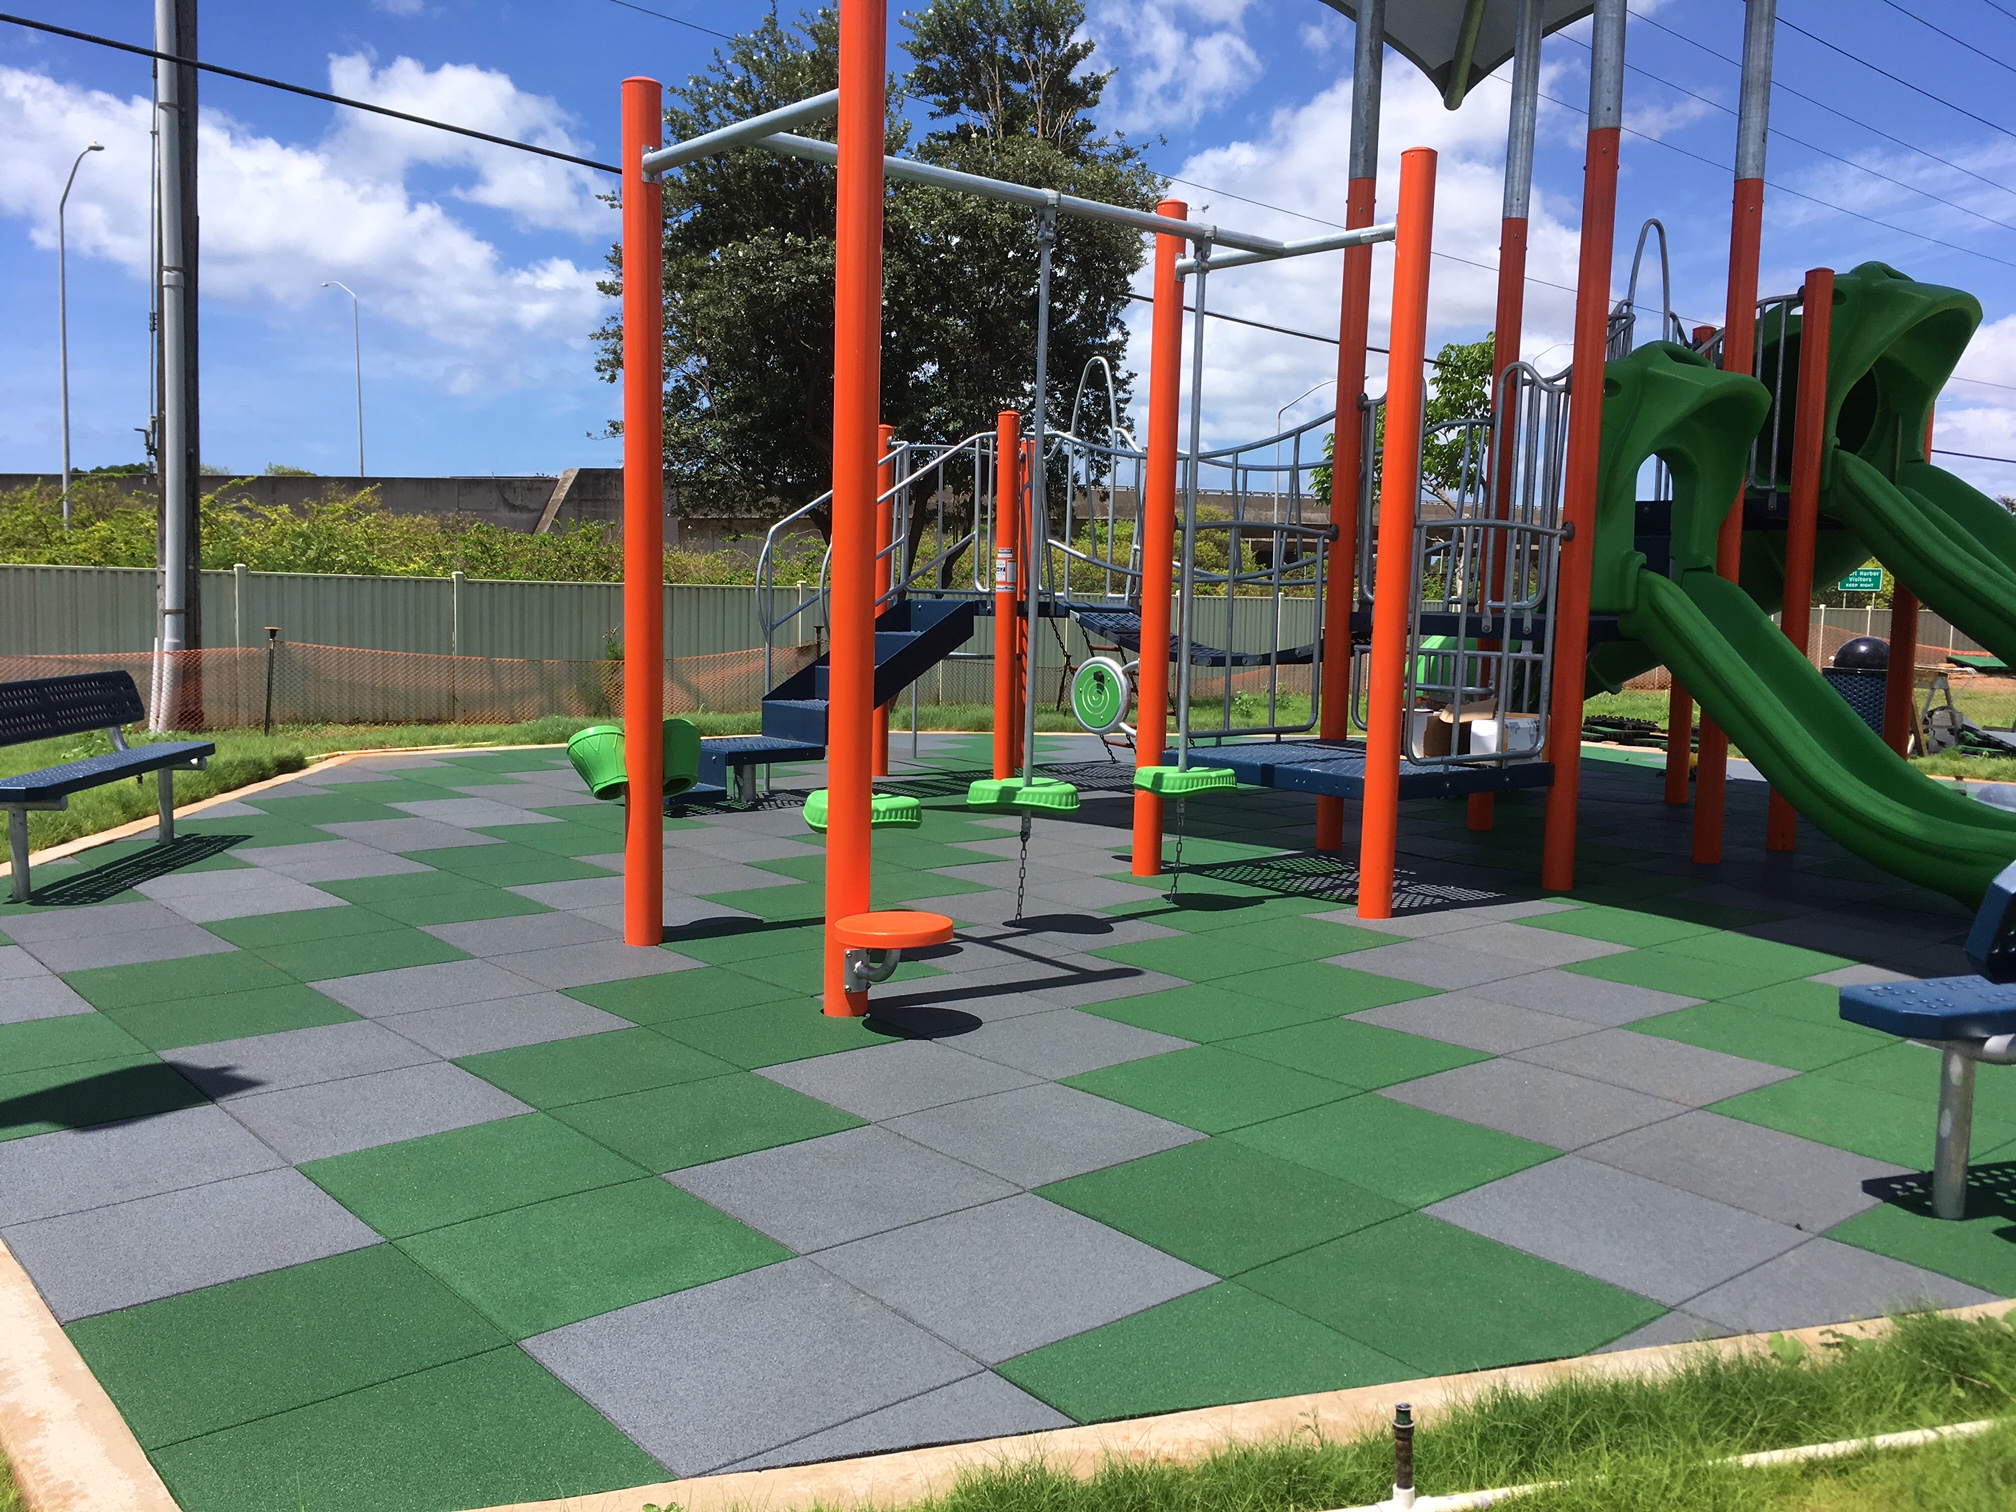 UNITY'S Soft-Land Series at this military base playground